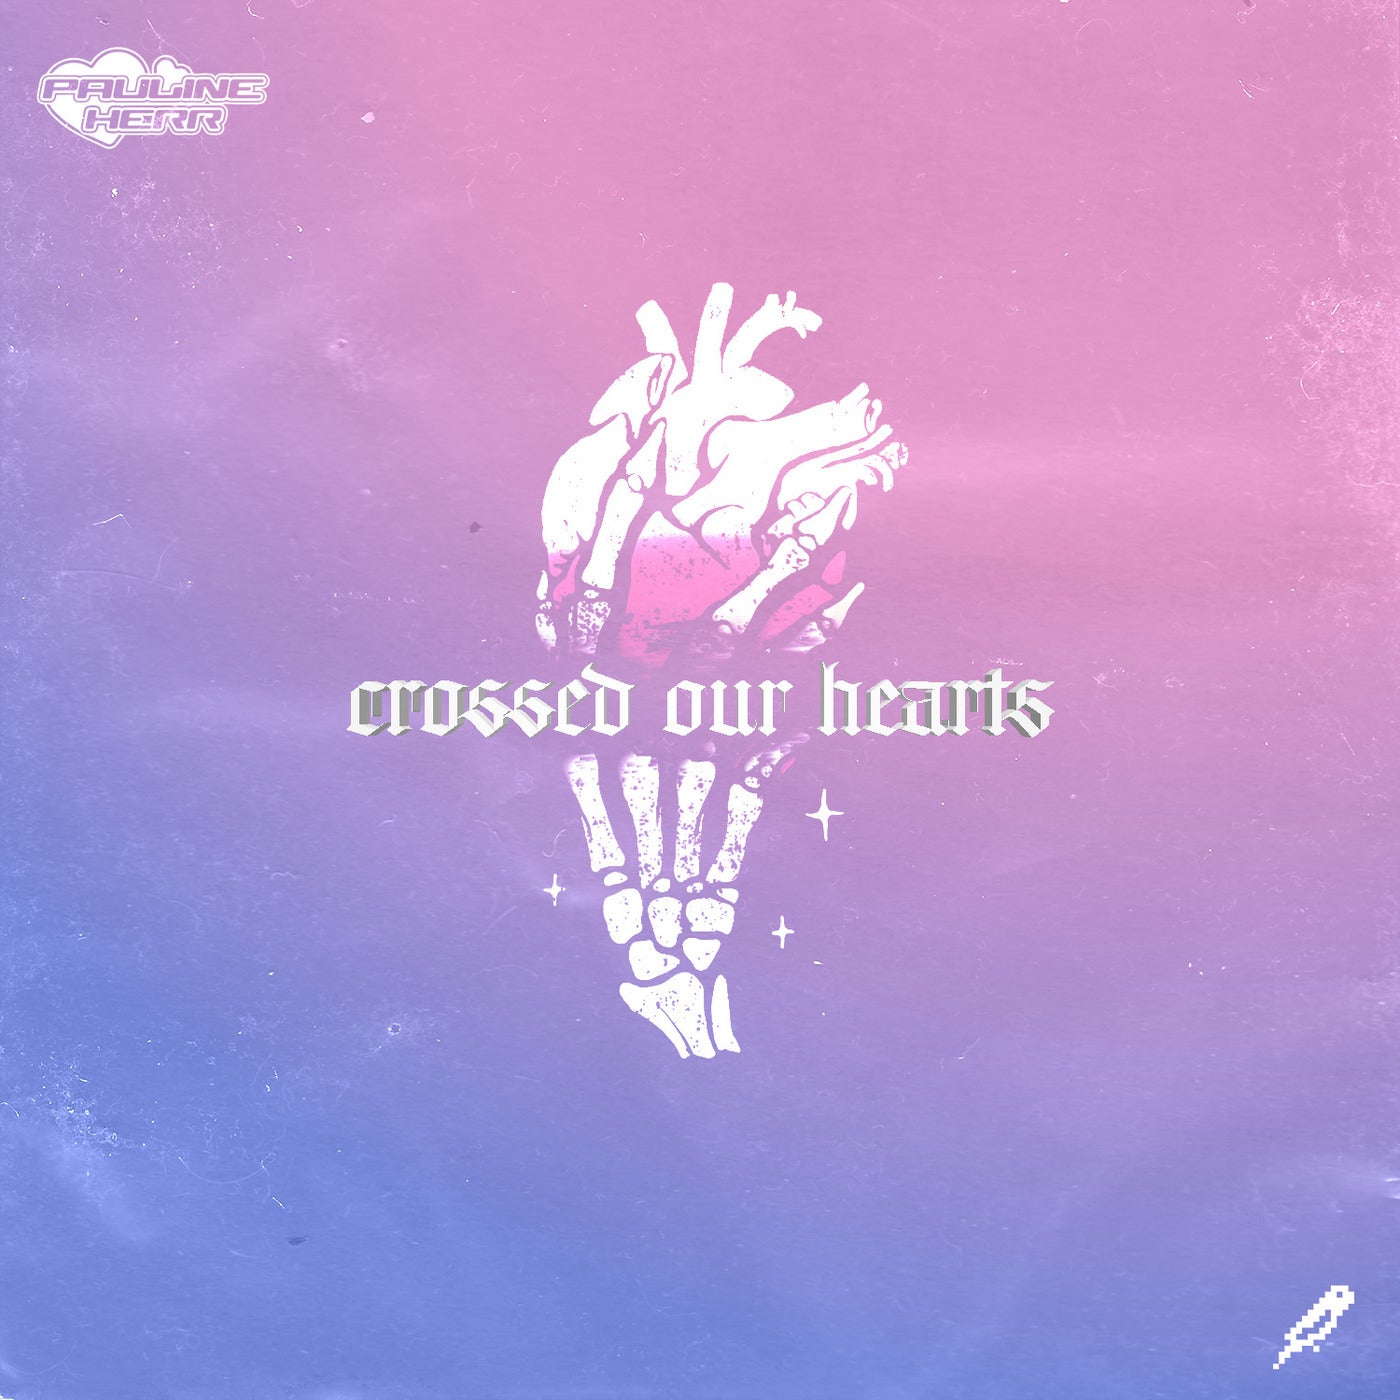 Crossed Our Hearts